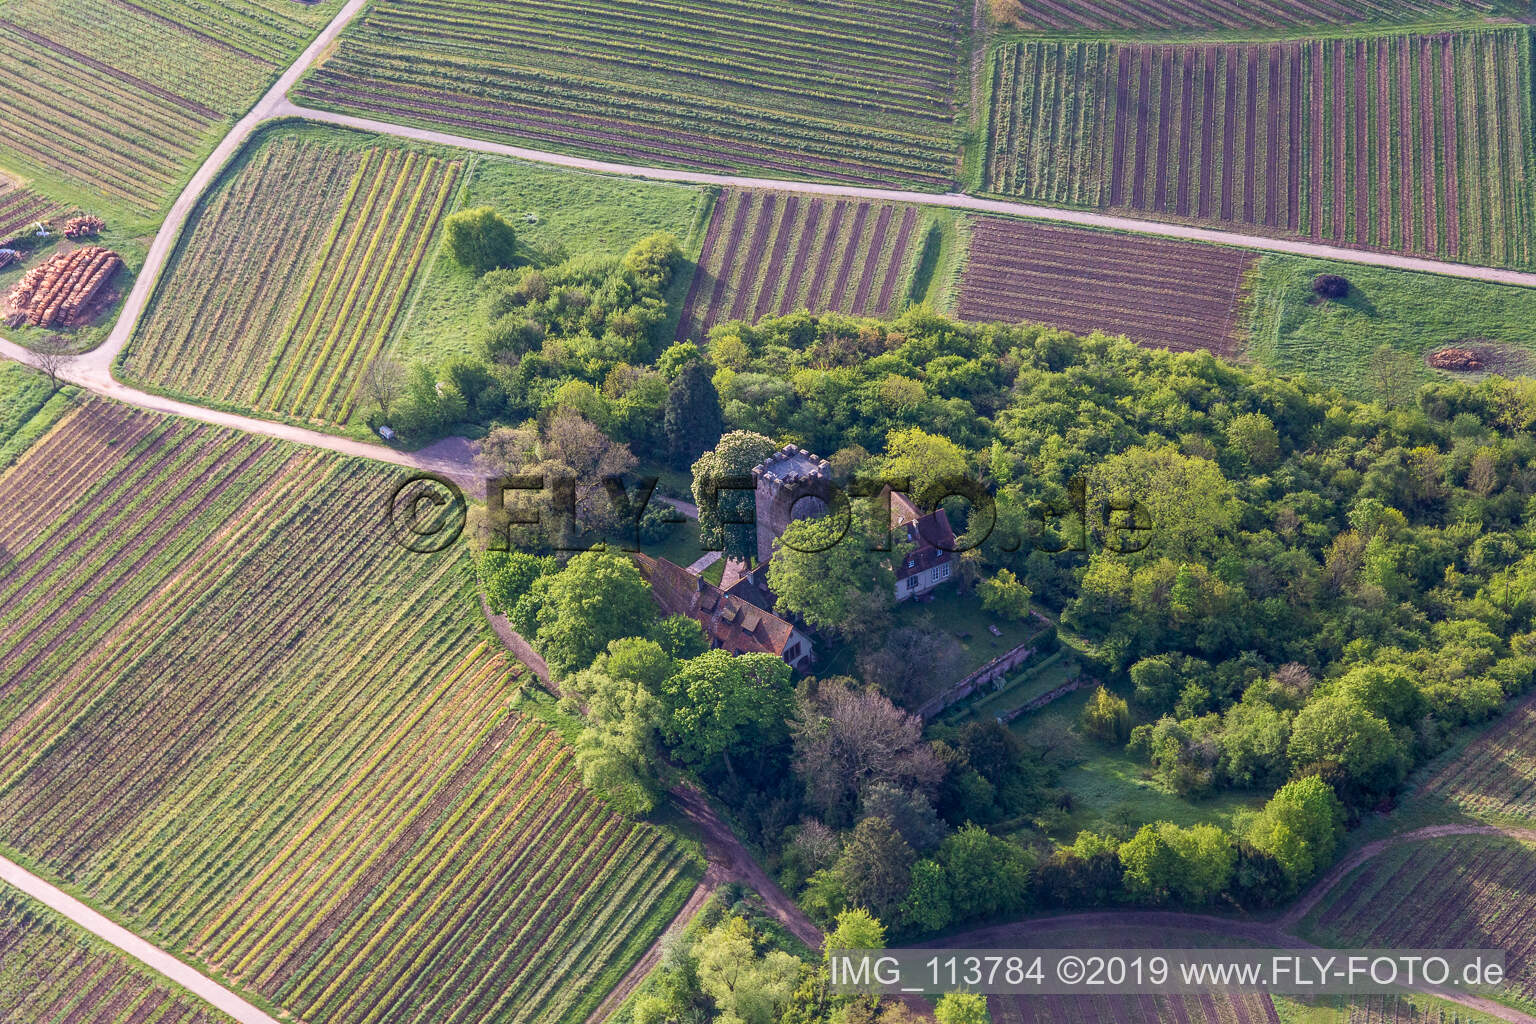 Drone image of Wissembourg in the state Bas-Rhin, France